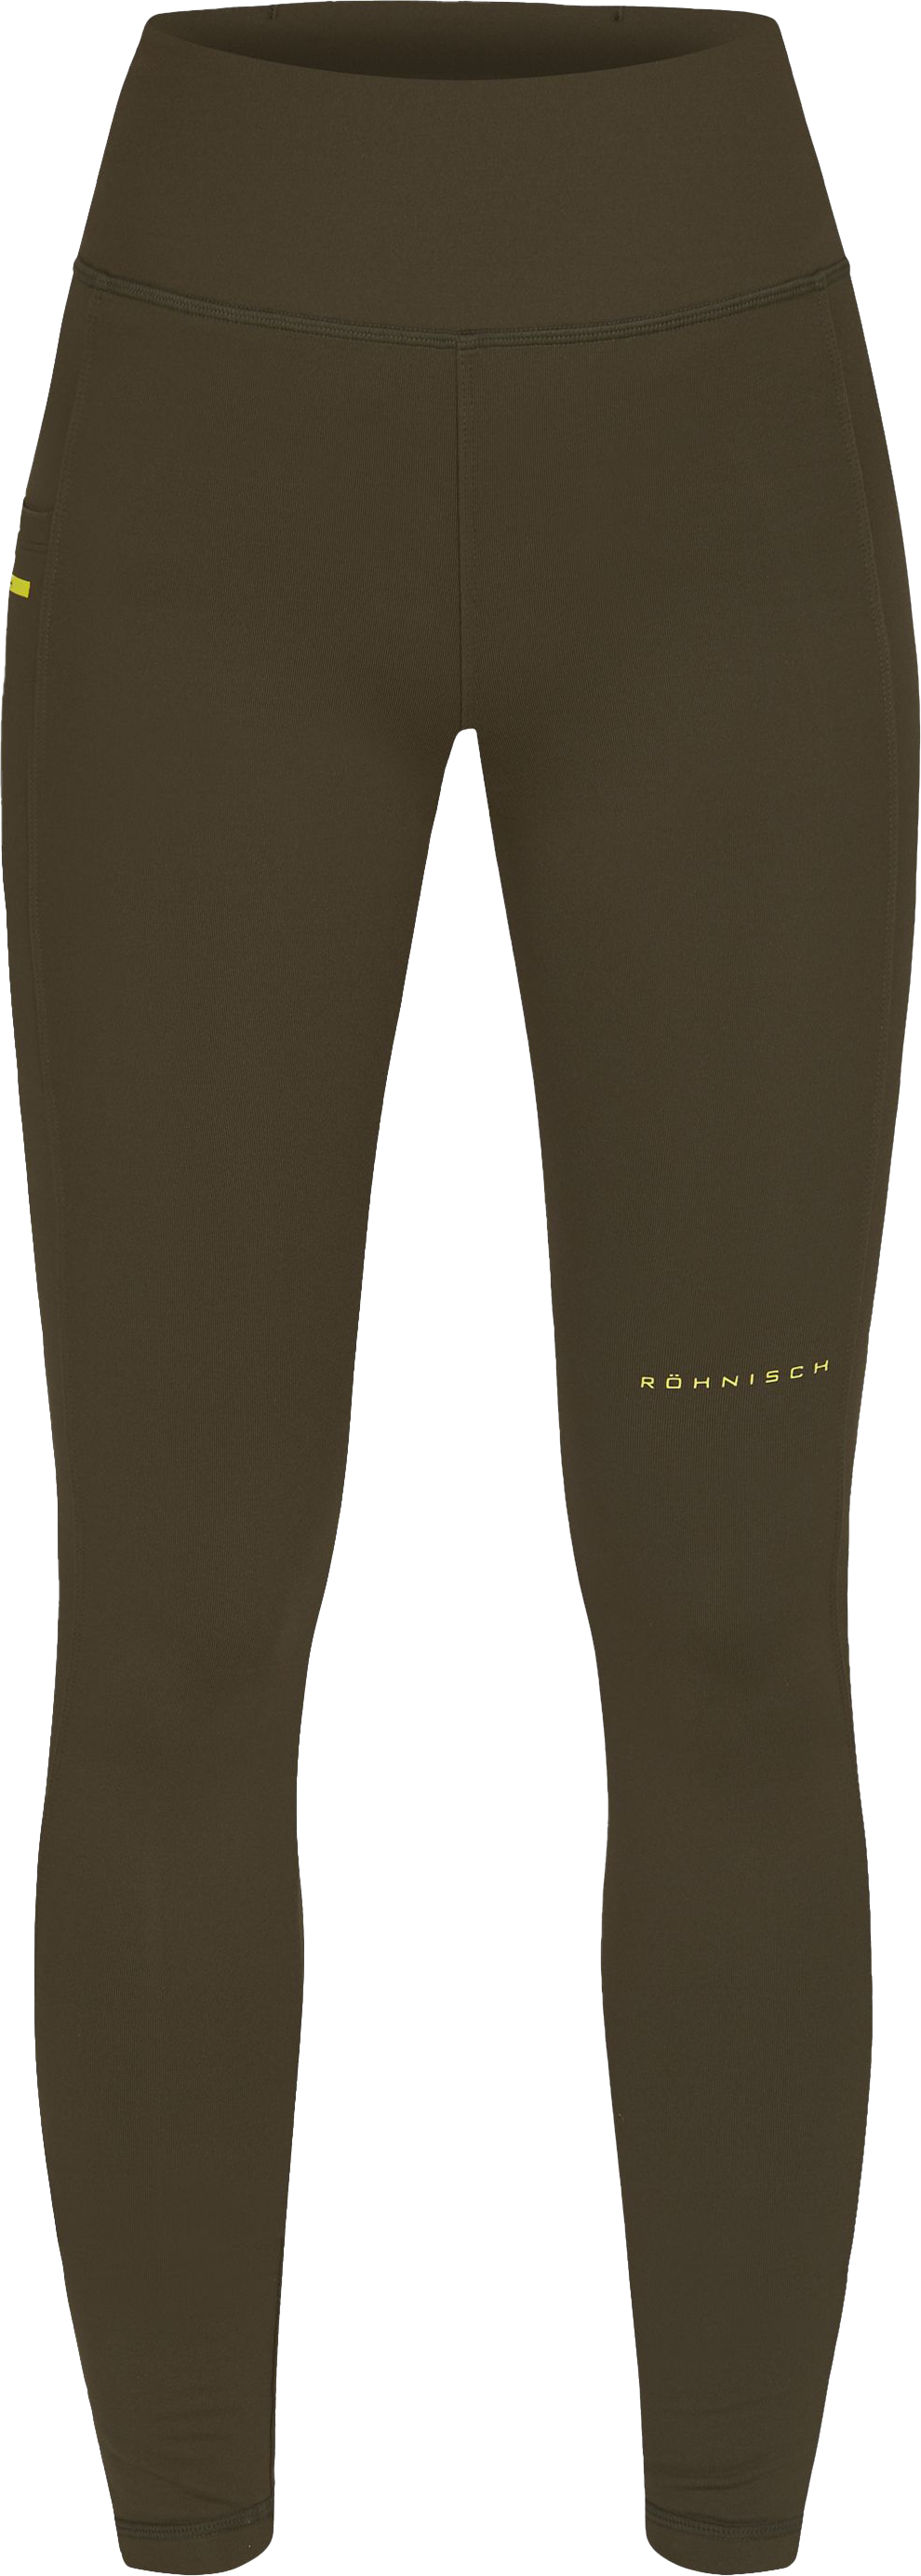 Women's Thermal Tights Black, Buy Women's Thermal Tights Black here